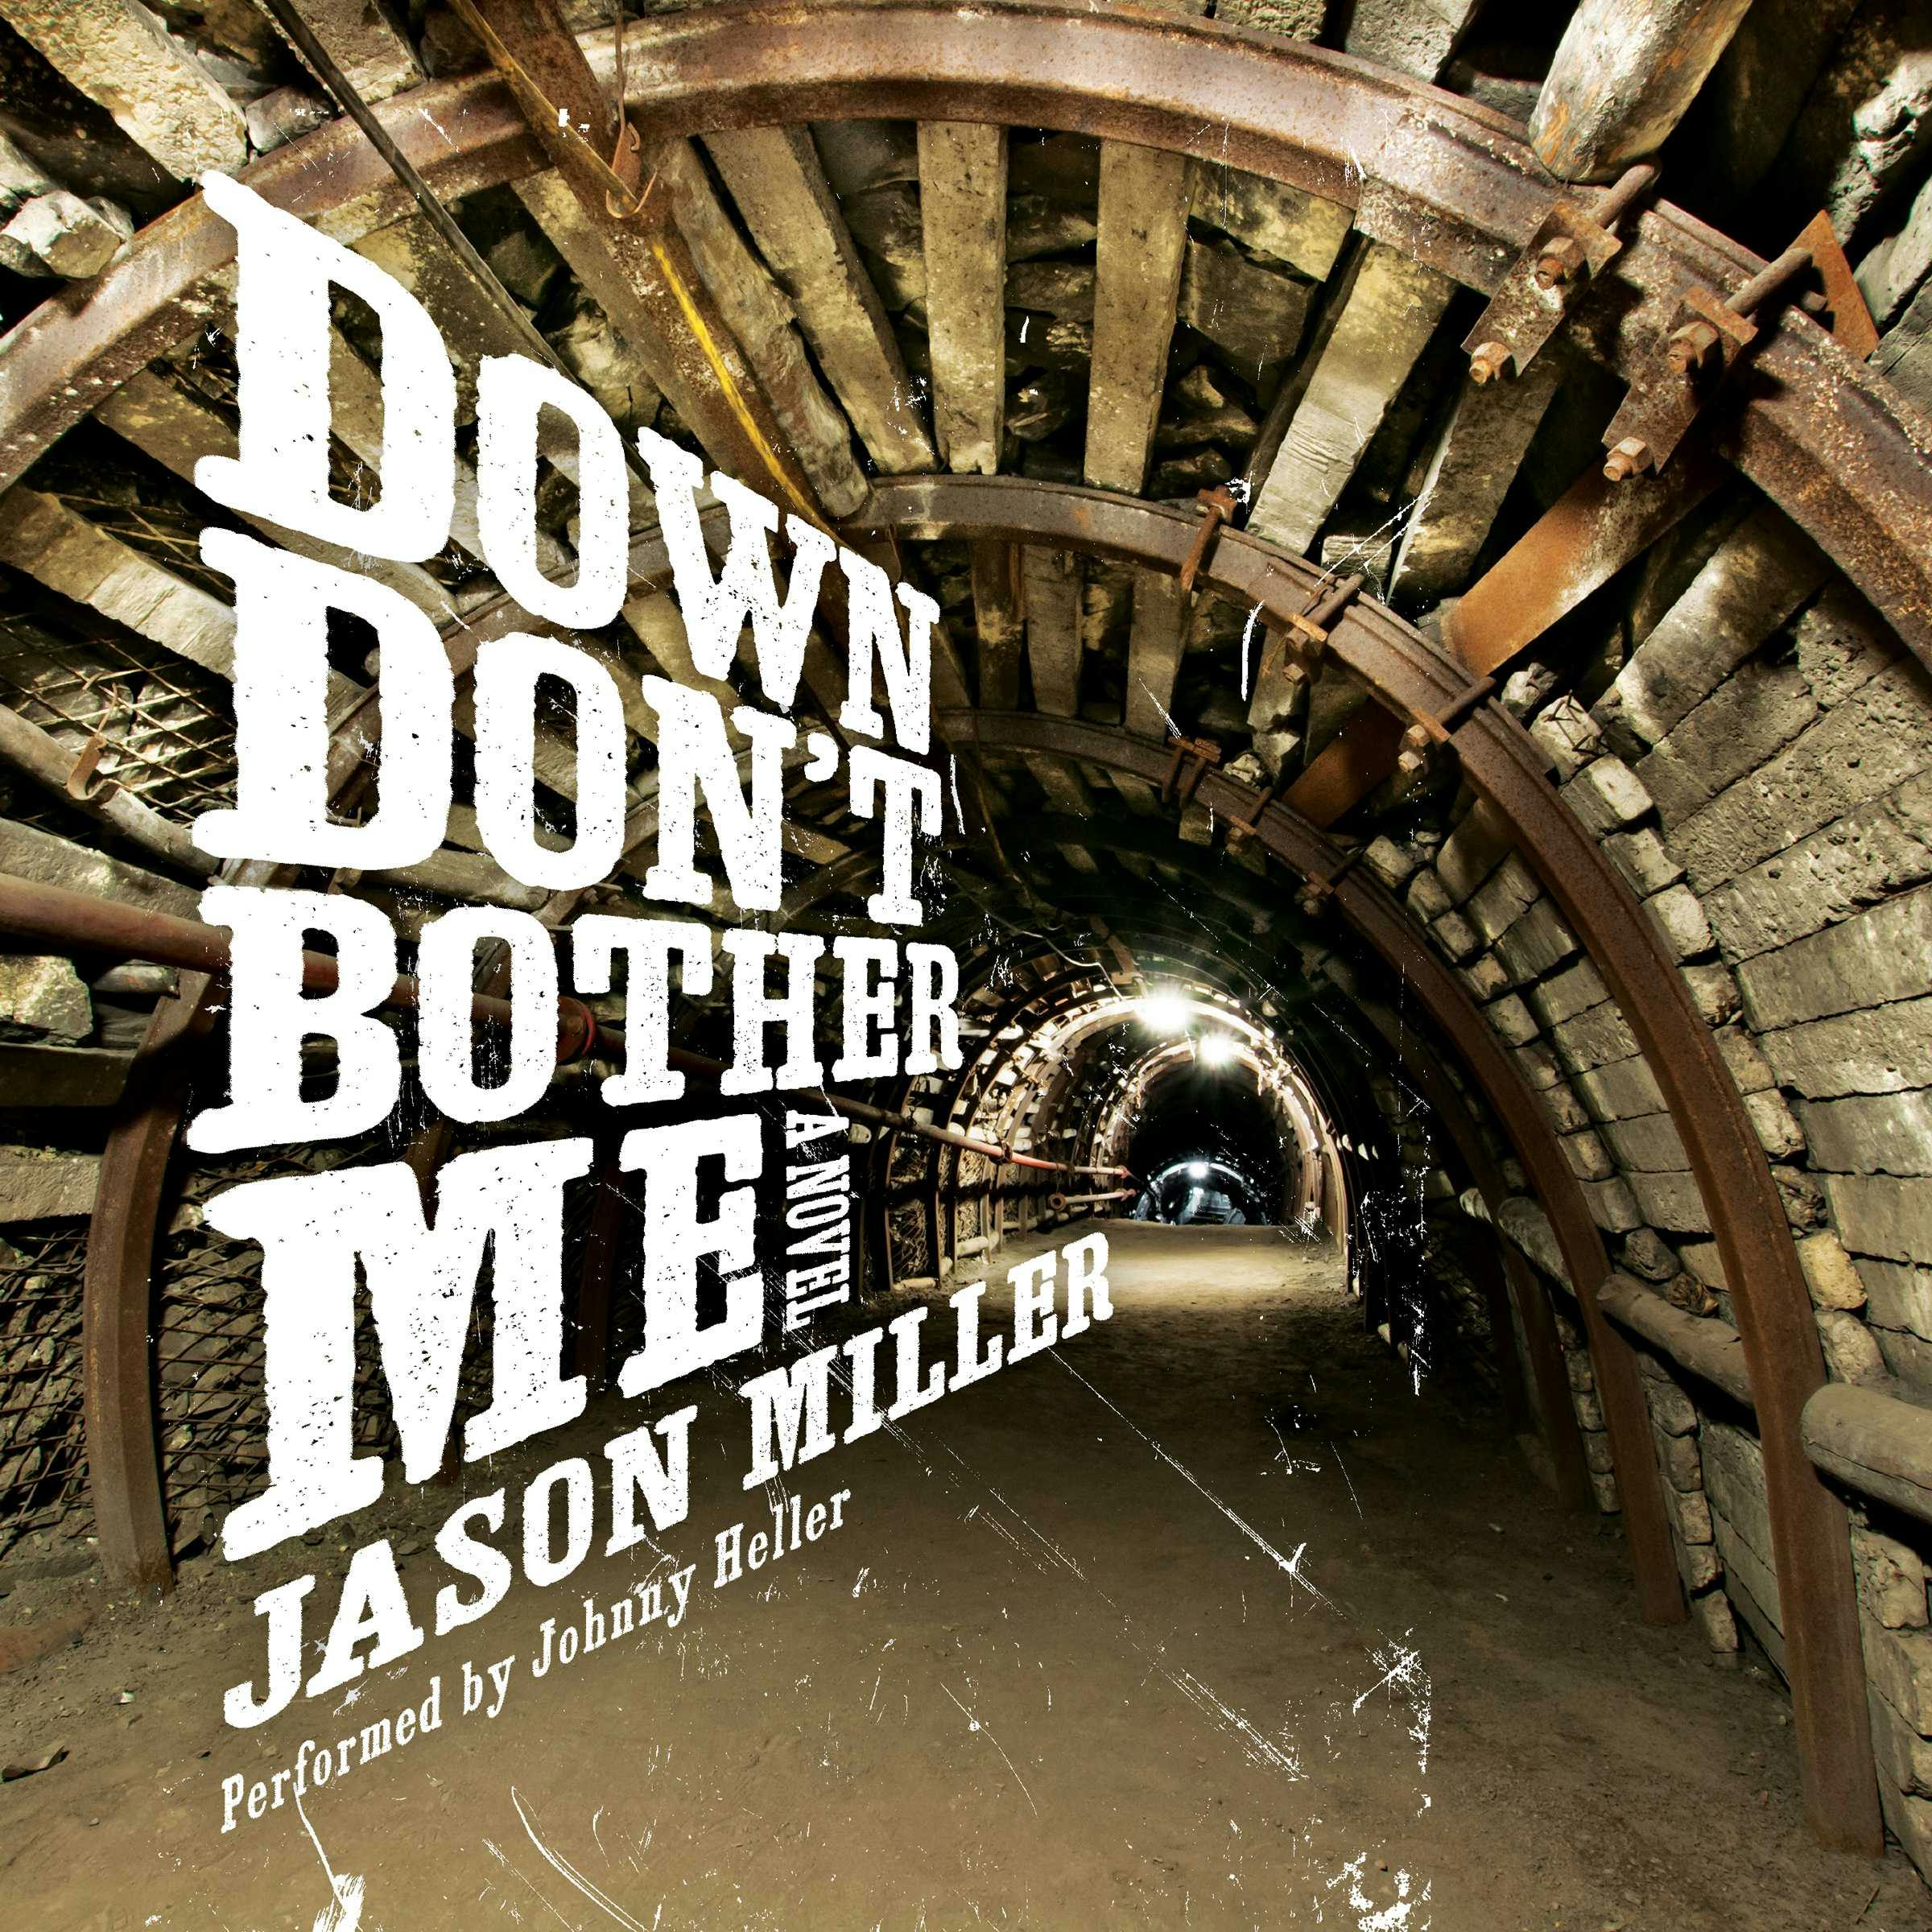 Down Don't Bother Me: A Novel - undefined